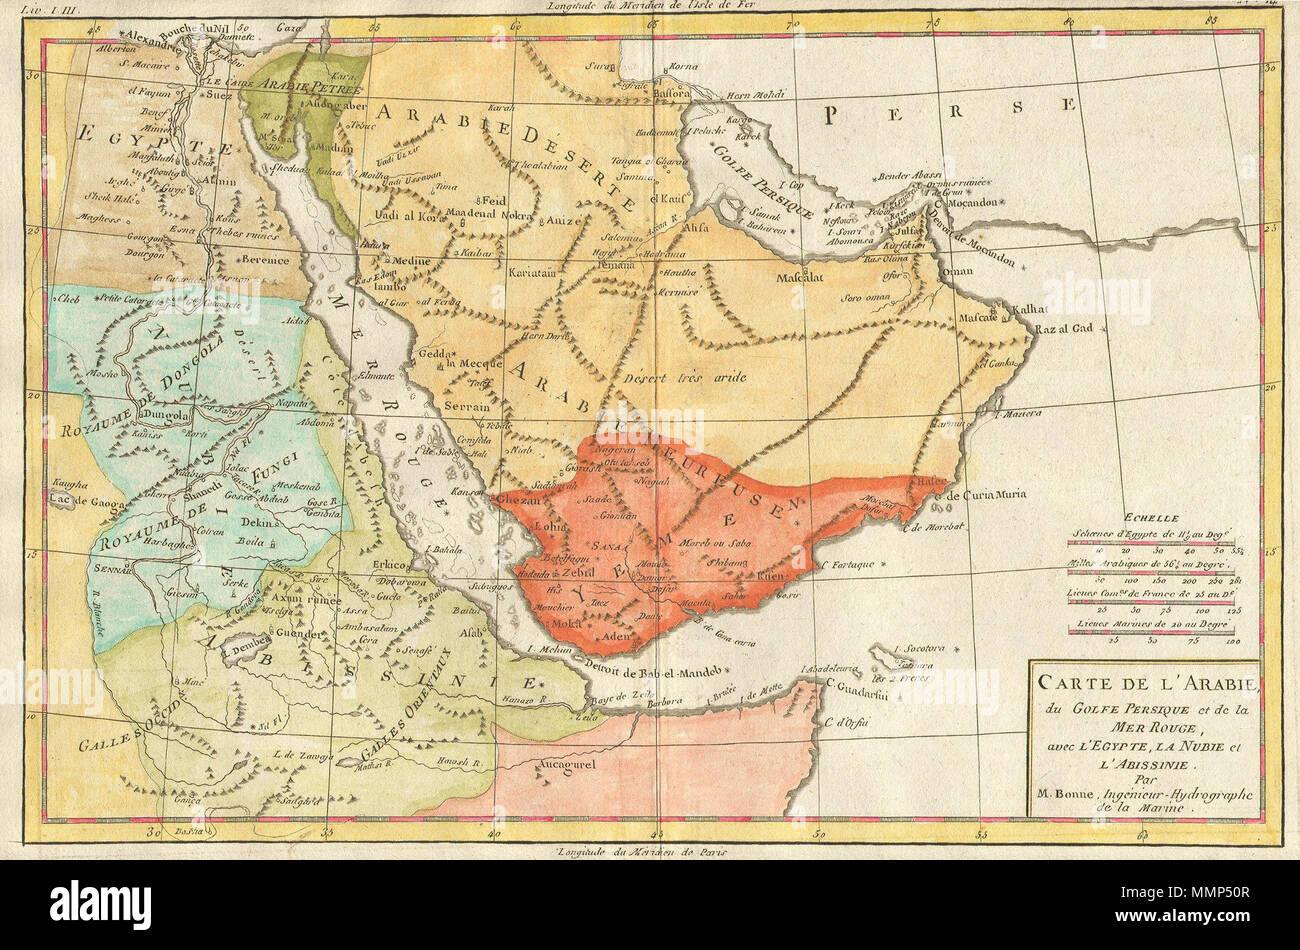 English This Is An Attractive Map Of Arabia Northwestern Africa Ethiopia Absynnia And The Red Sea By The Mapmaker Rigobert Bonne C 1780 Towns Churches Cities And Mountains Are Depicted As